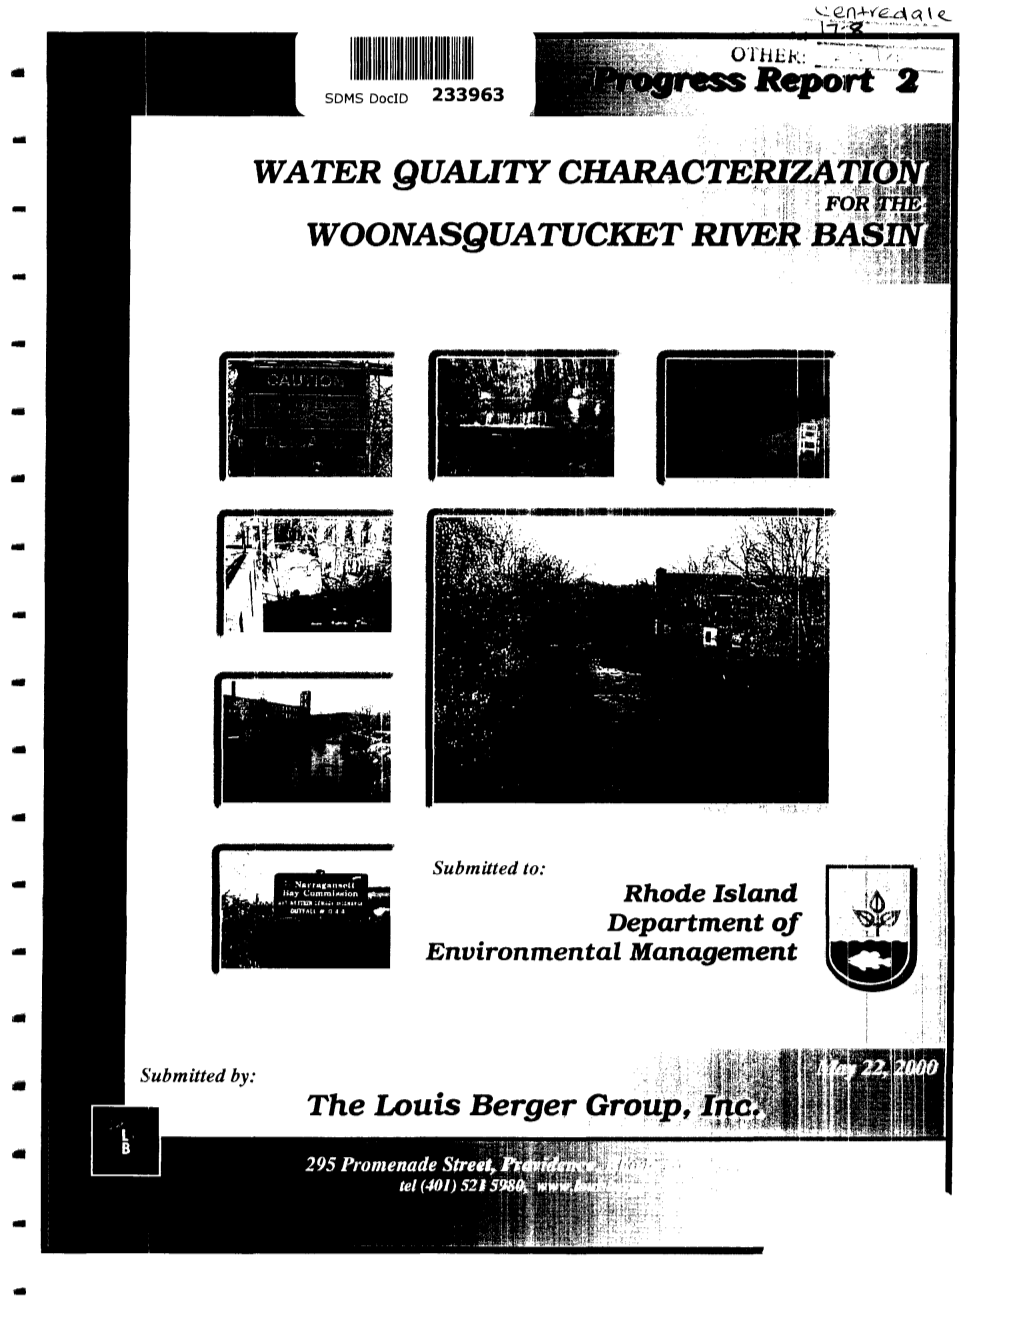 Water Quality Characterization for the Woonasquatucket River Basin